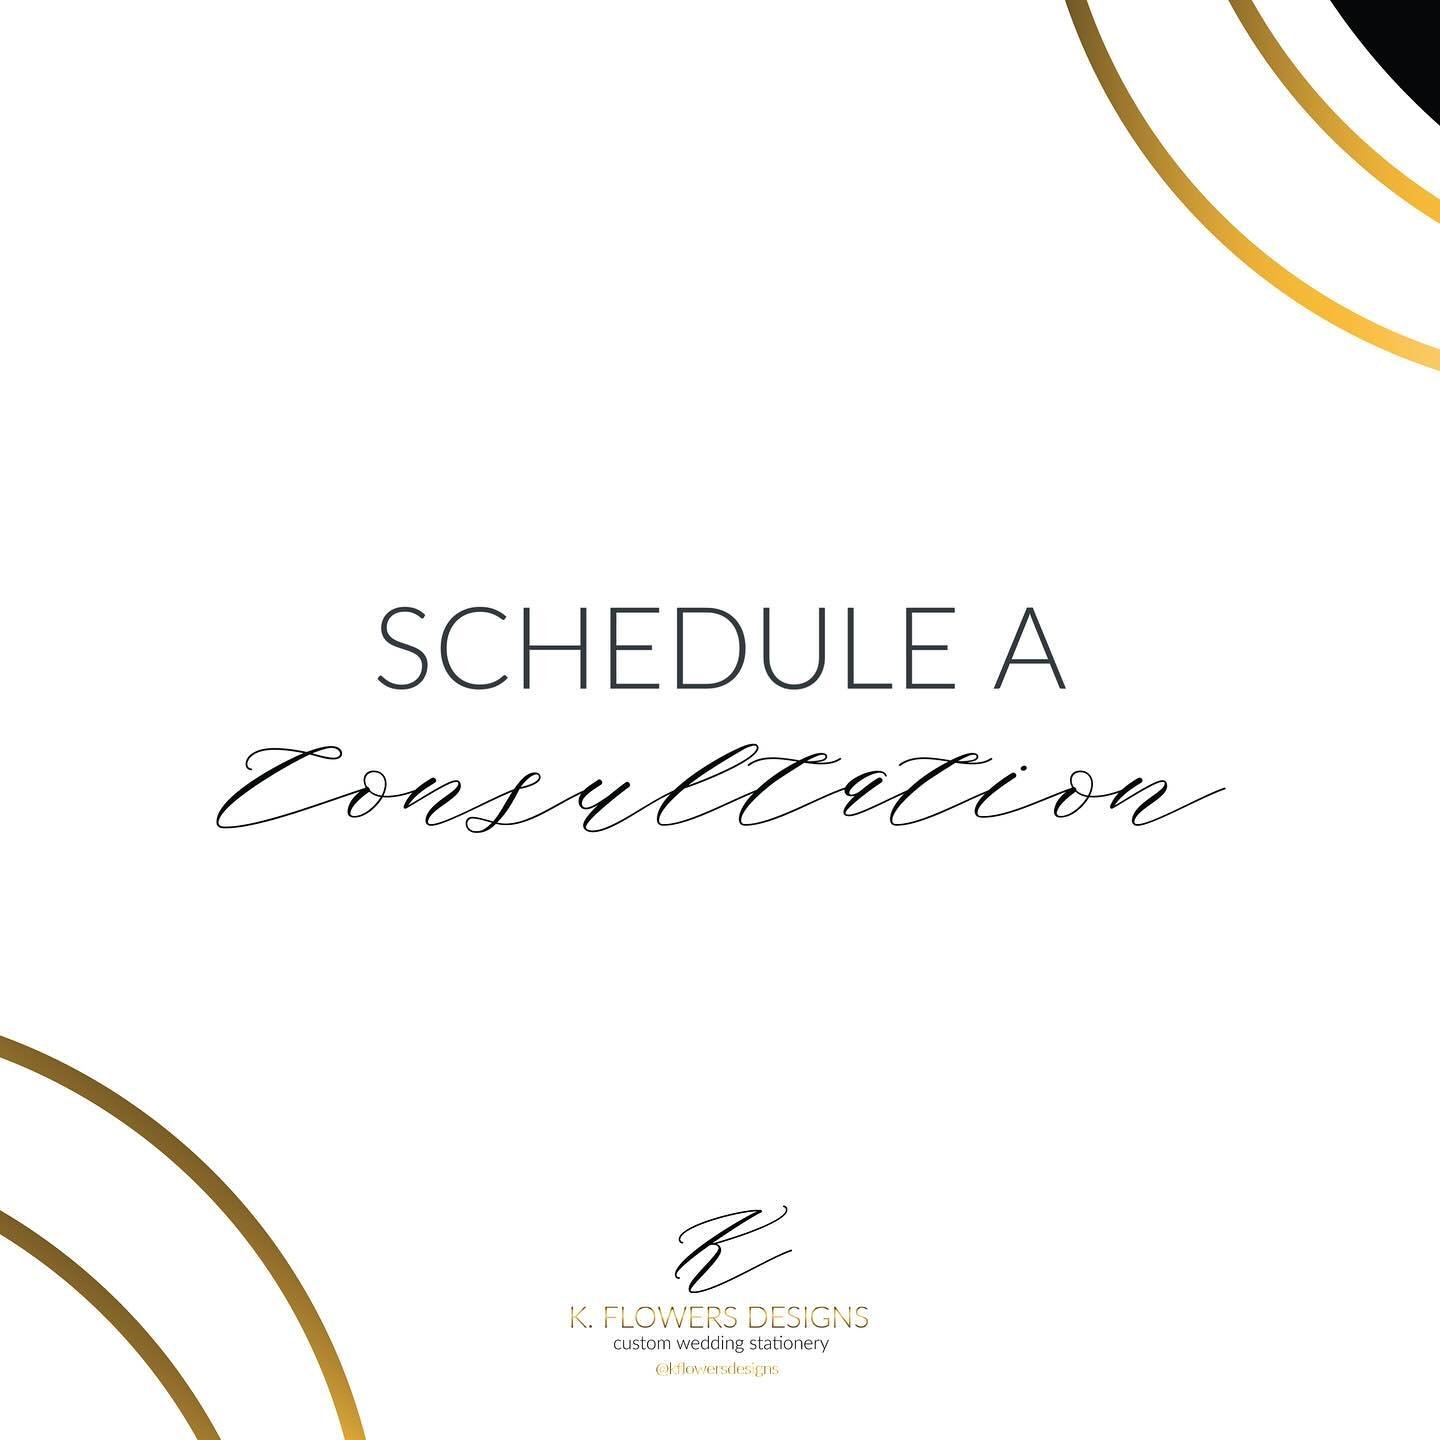 Let&rsquo;s start talking #wedding stationery! Save the dates, #invitations, welcome packets for out of town guests, menus, programs, escort cards/seating charts, all things signage, all the things to brand your wedding. Let&rsquo;s talk!! 📞